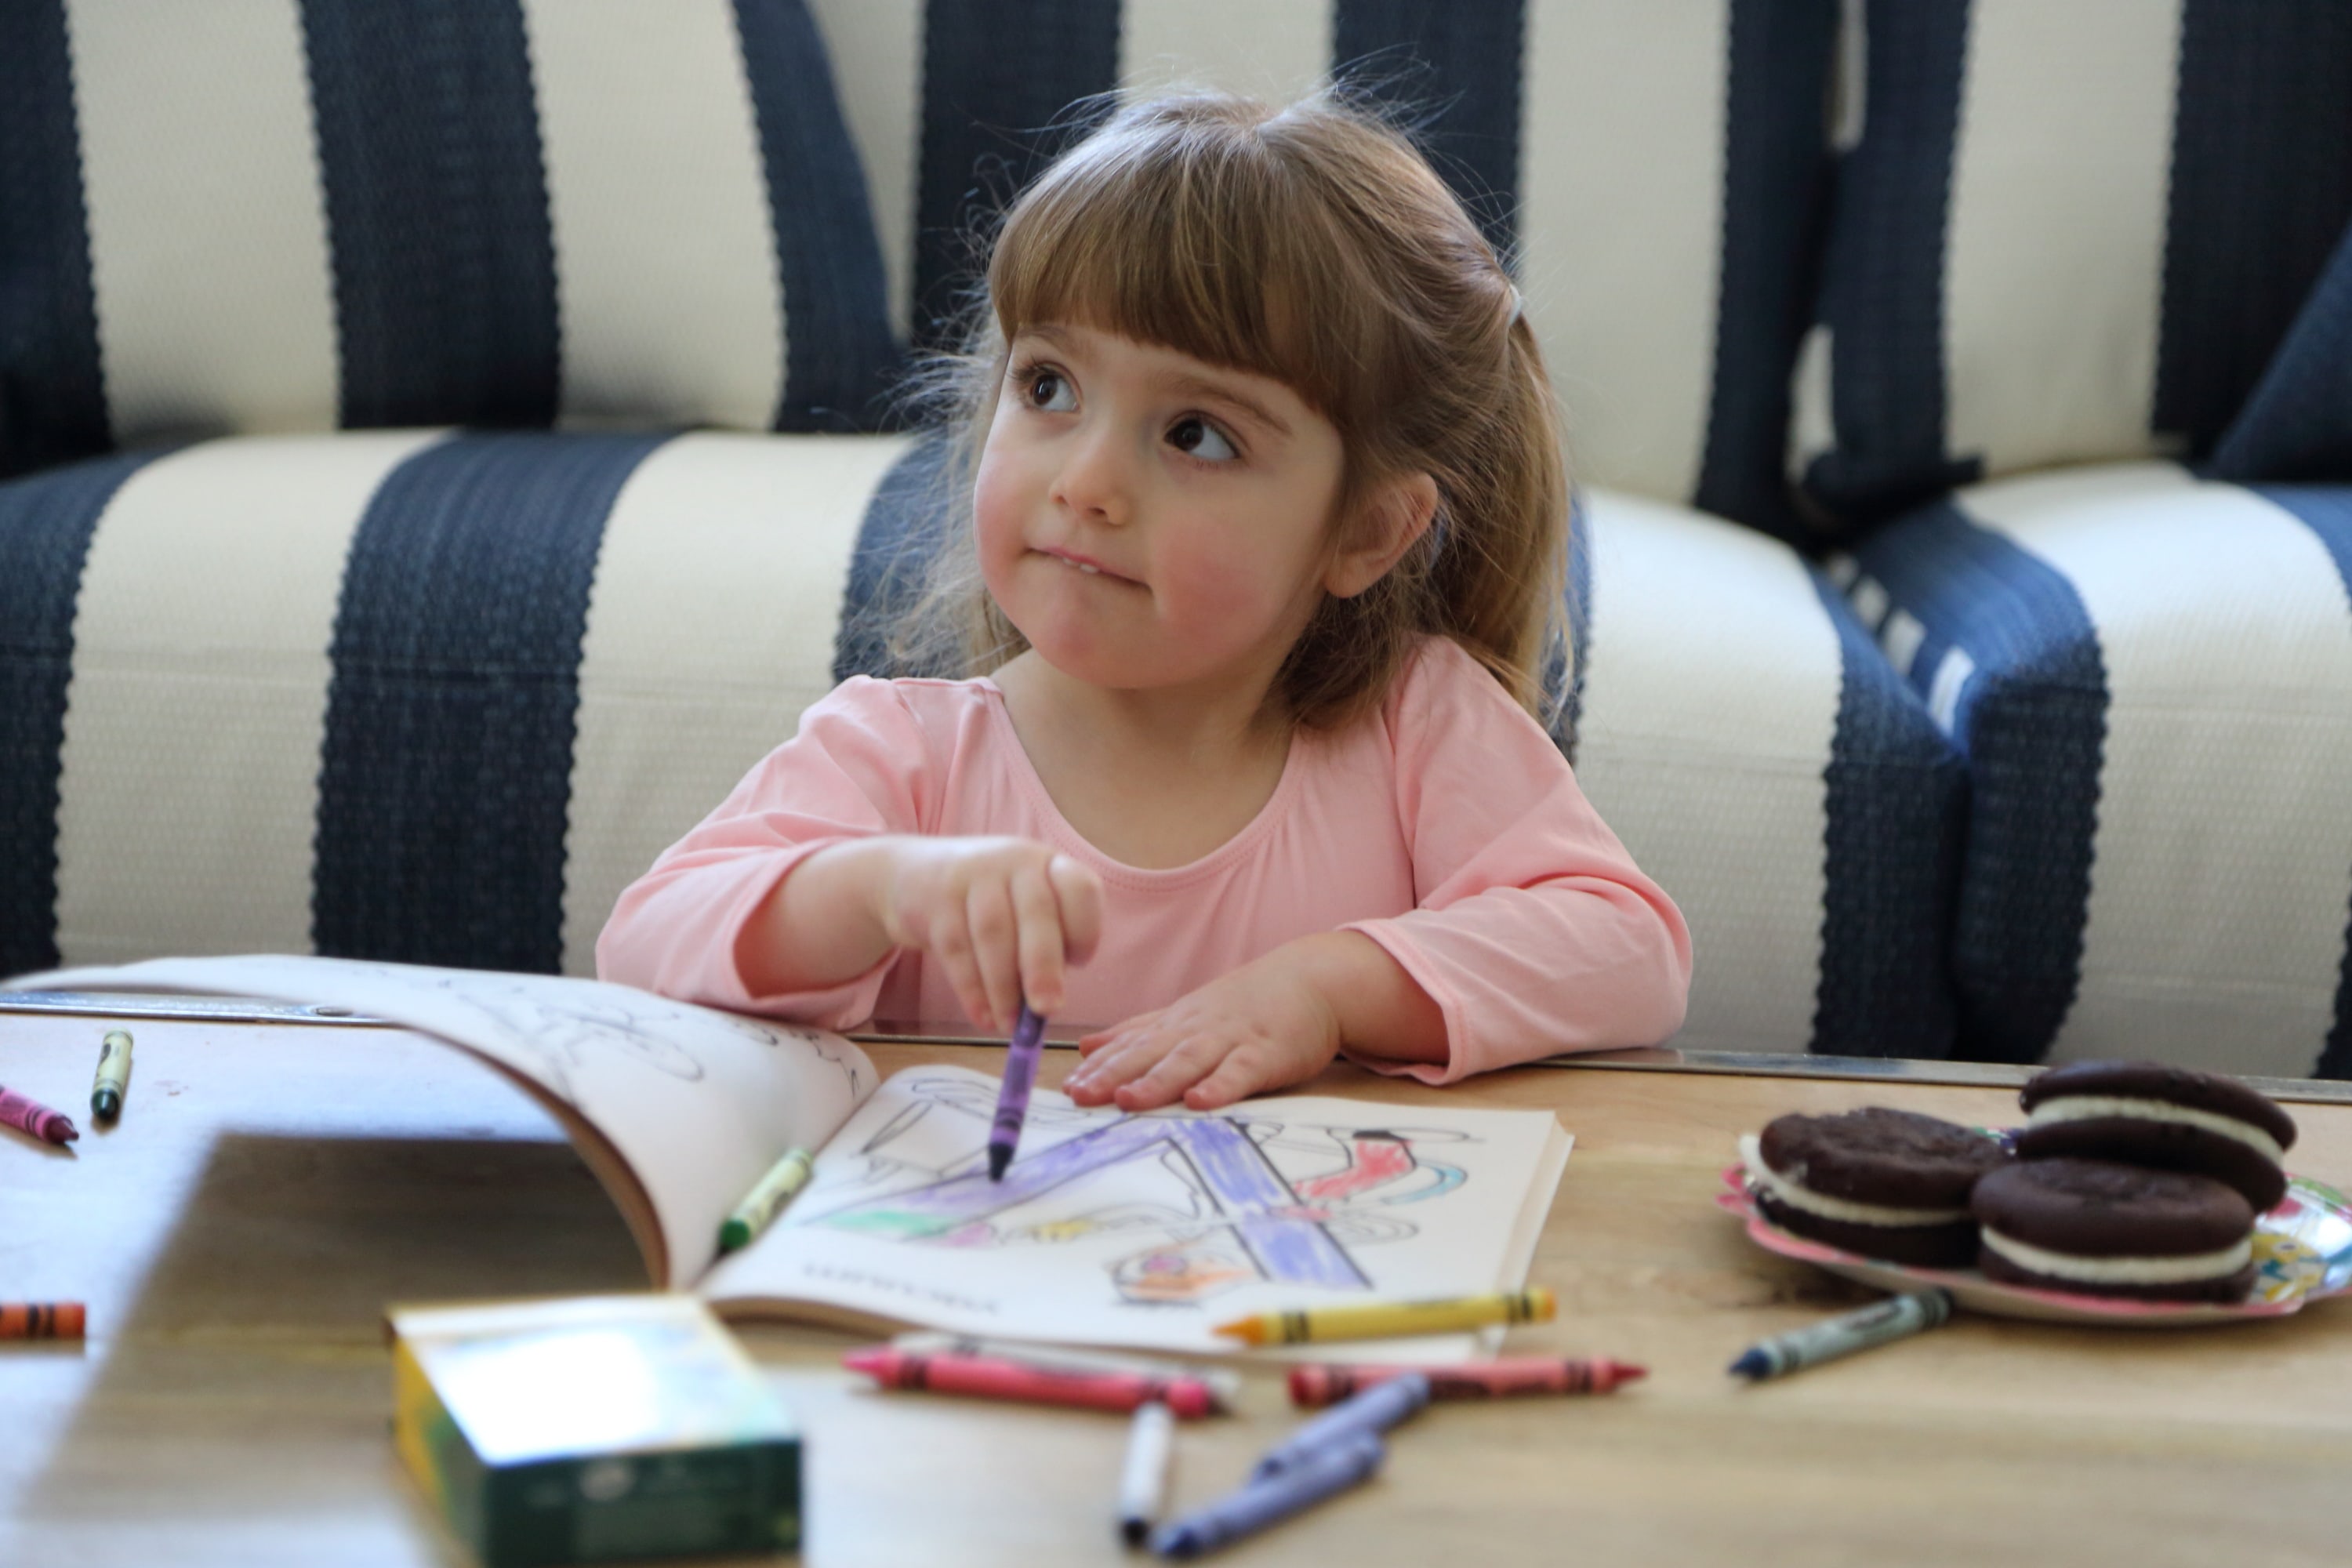 child coloring in coloring book on coffee table in front of a blue and white stripped couch